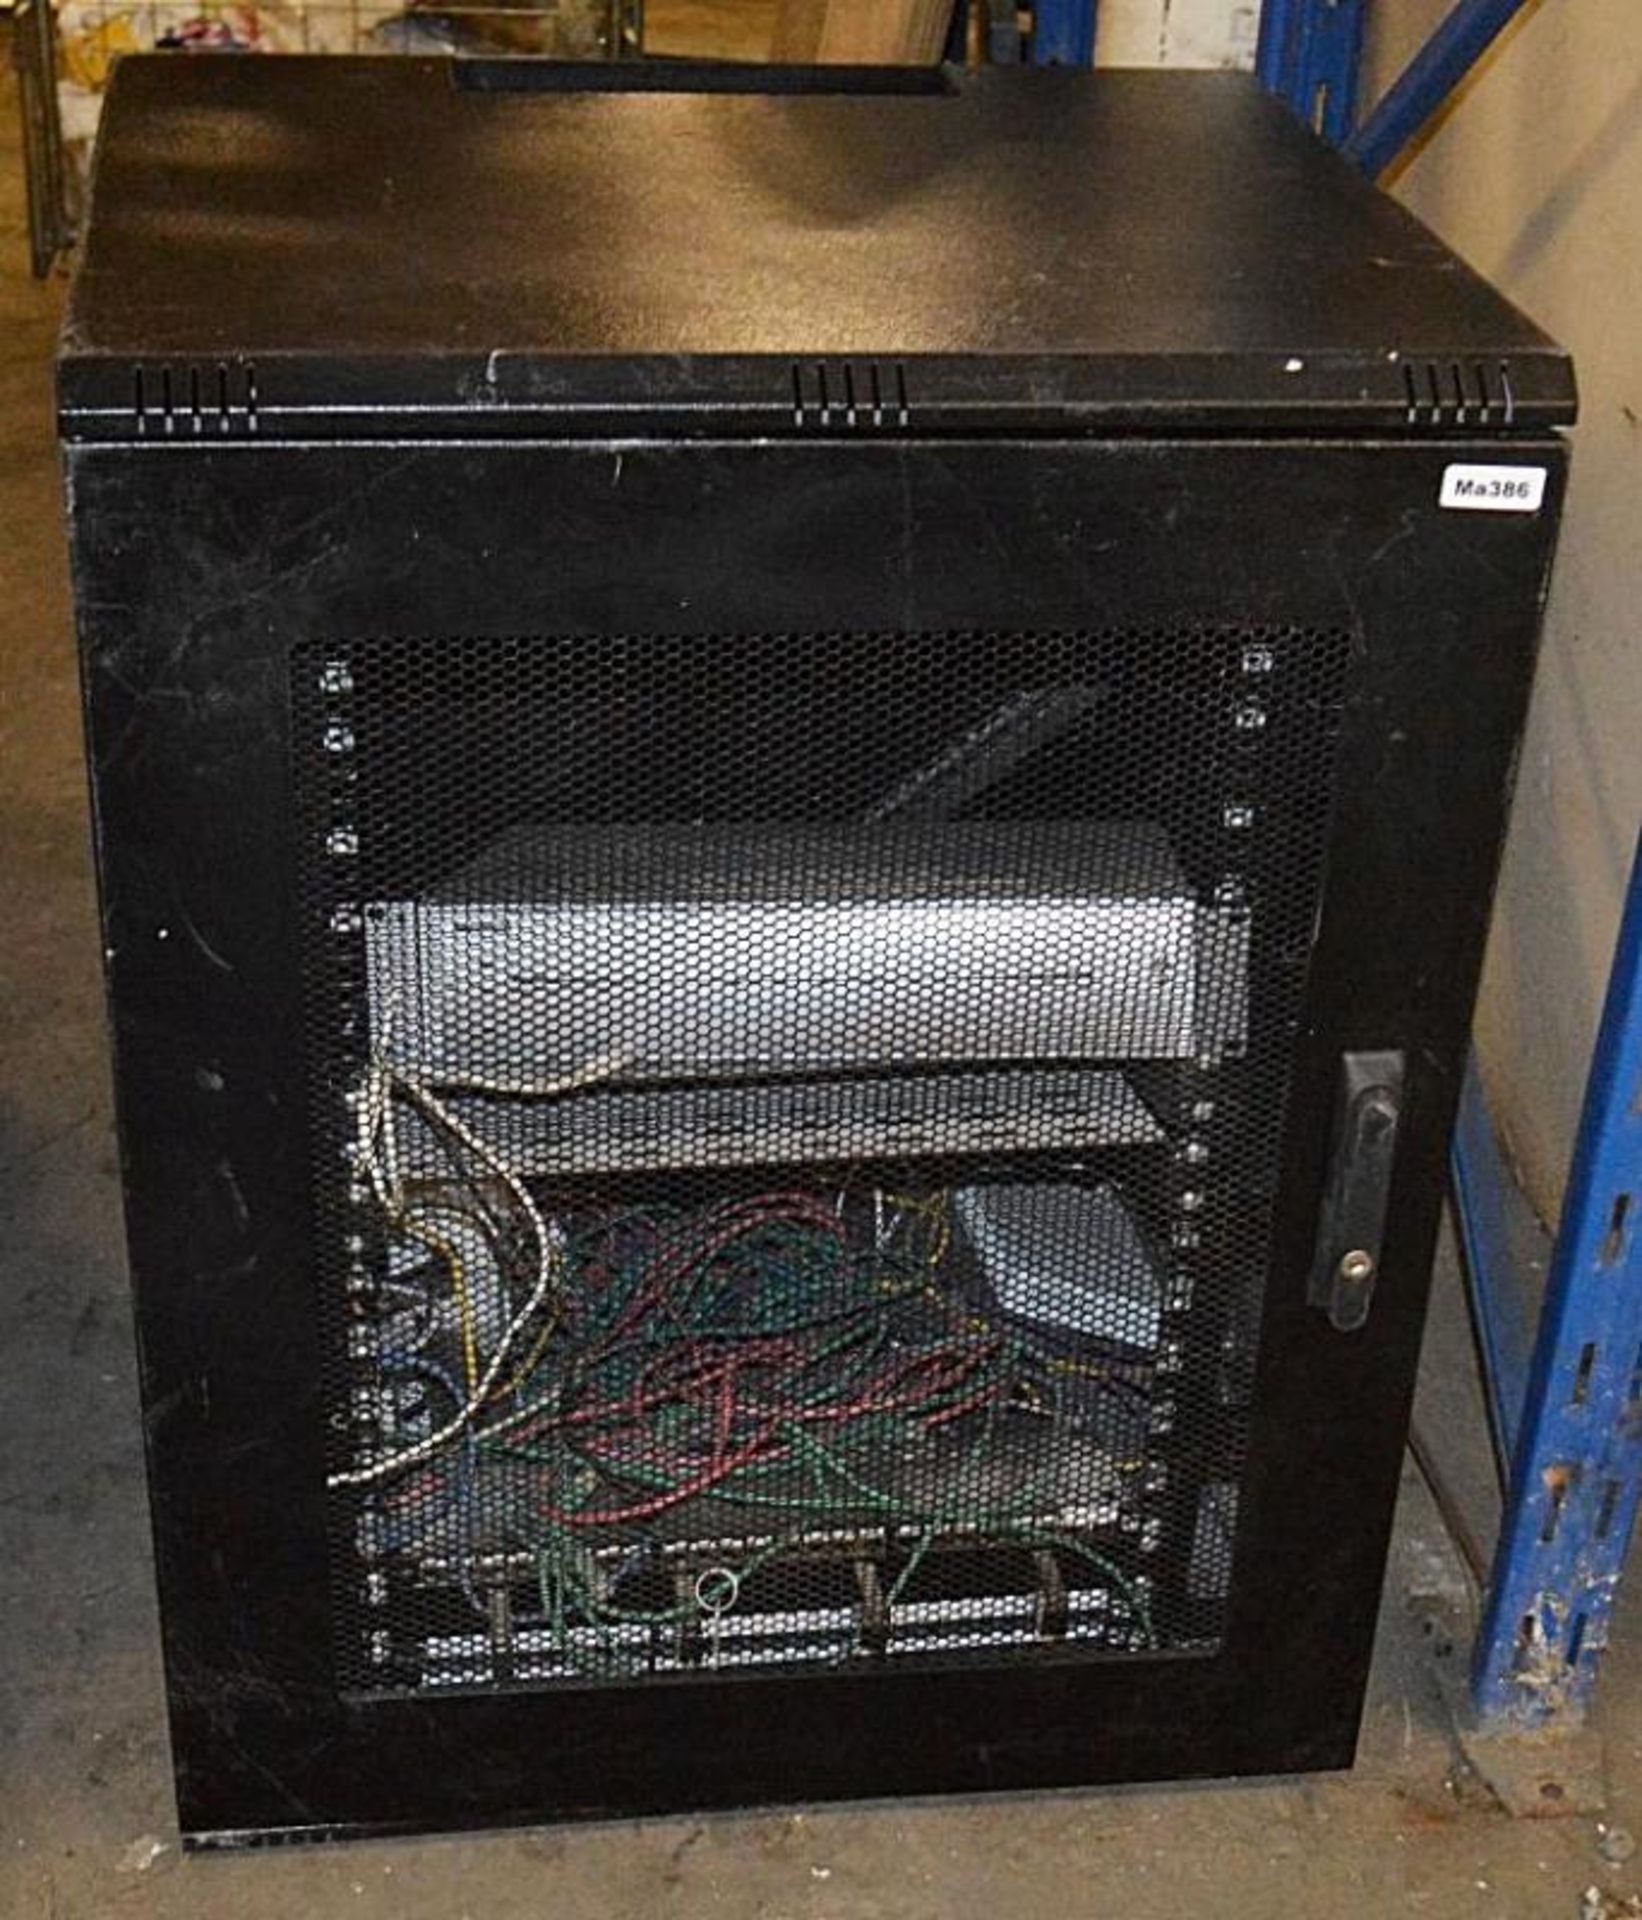 1 x CCTV Server Cabinet With Key - Dimensions: W70 x D60 x H90cm - Low Start, No Reserve - Ref: ma38